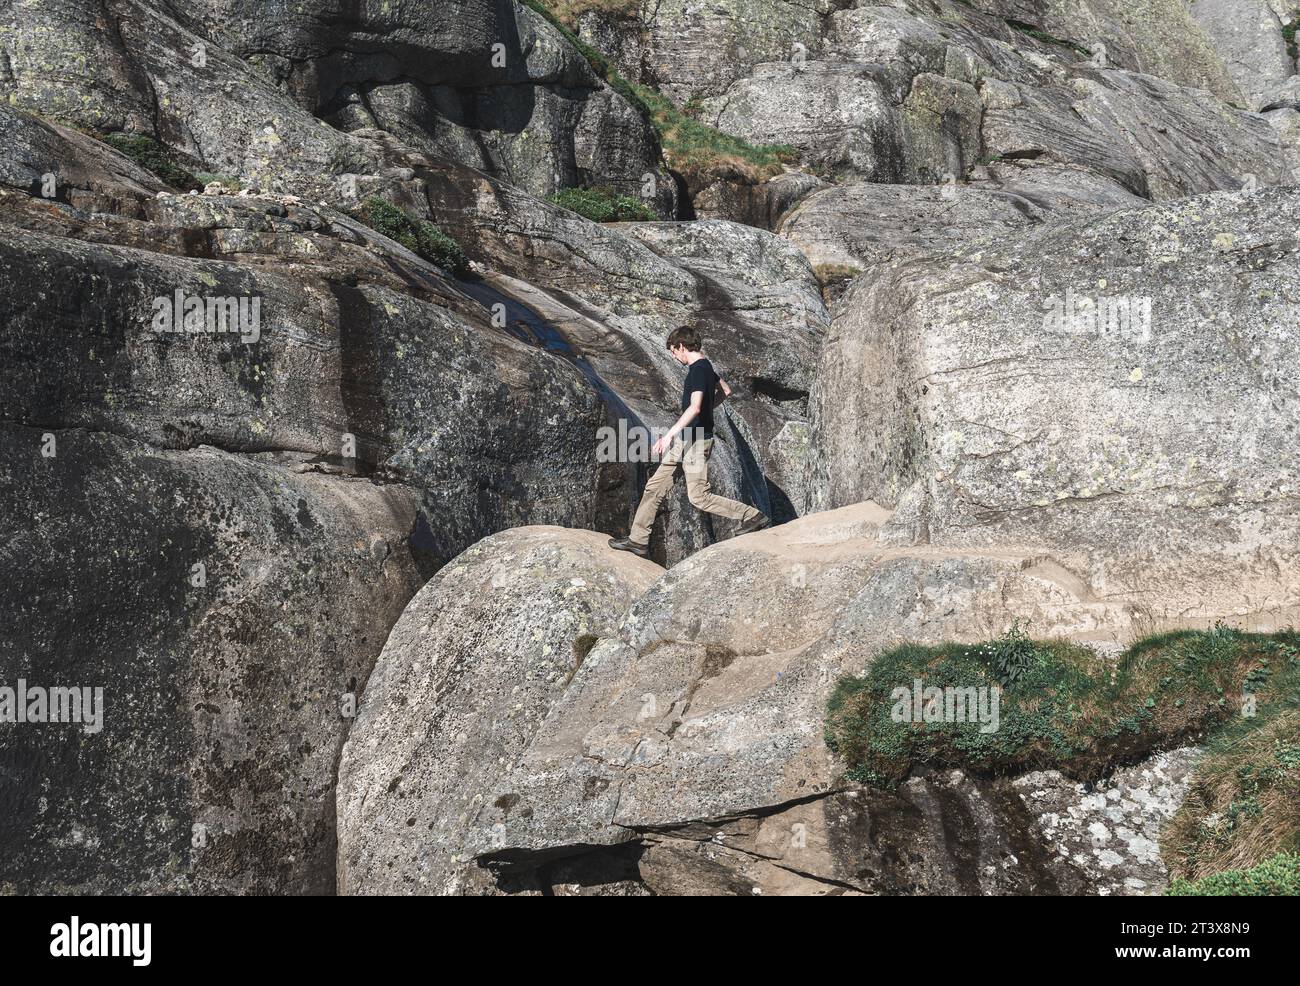 young man climbs a rock Kjerag stuck in a rock in the mountains Stock Photo